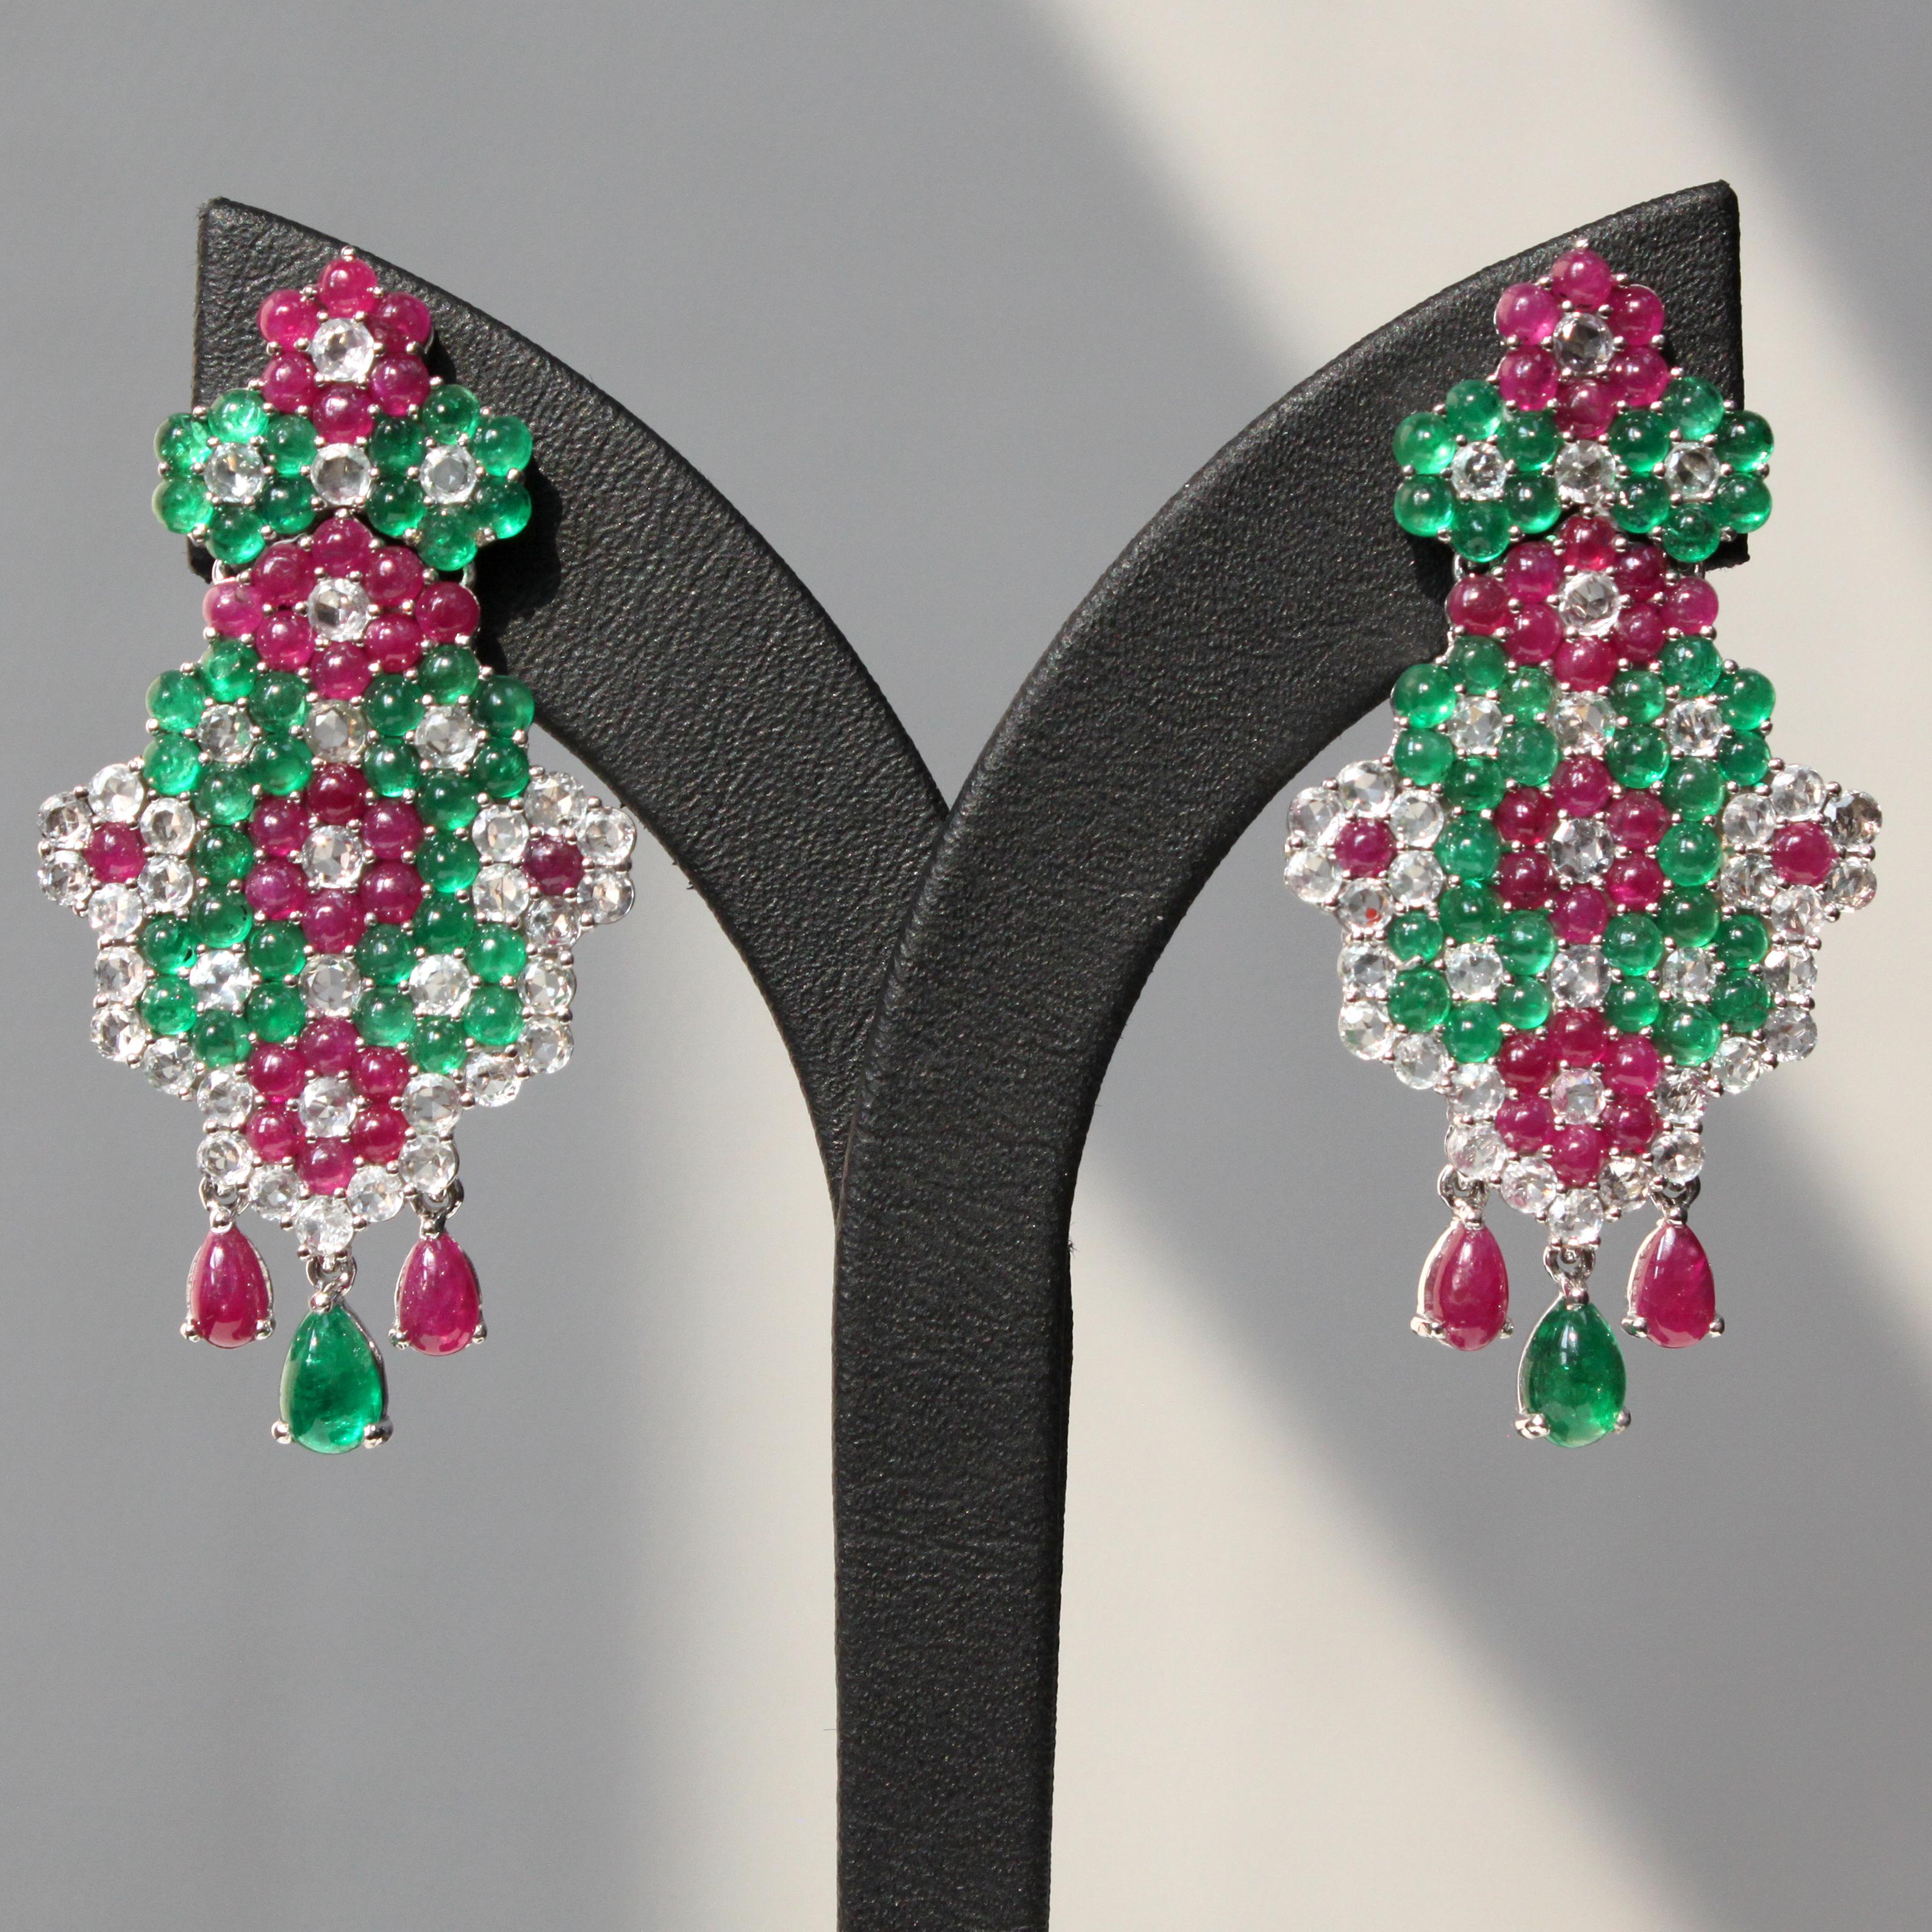 Women's 14K white gold earrings adorned with emeralds, rubies, and white sapphires For Sale